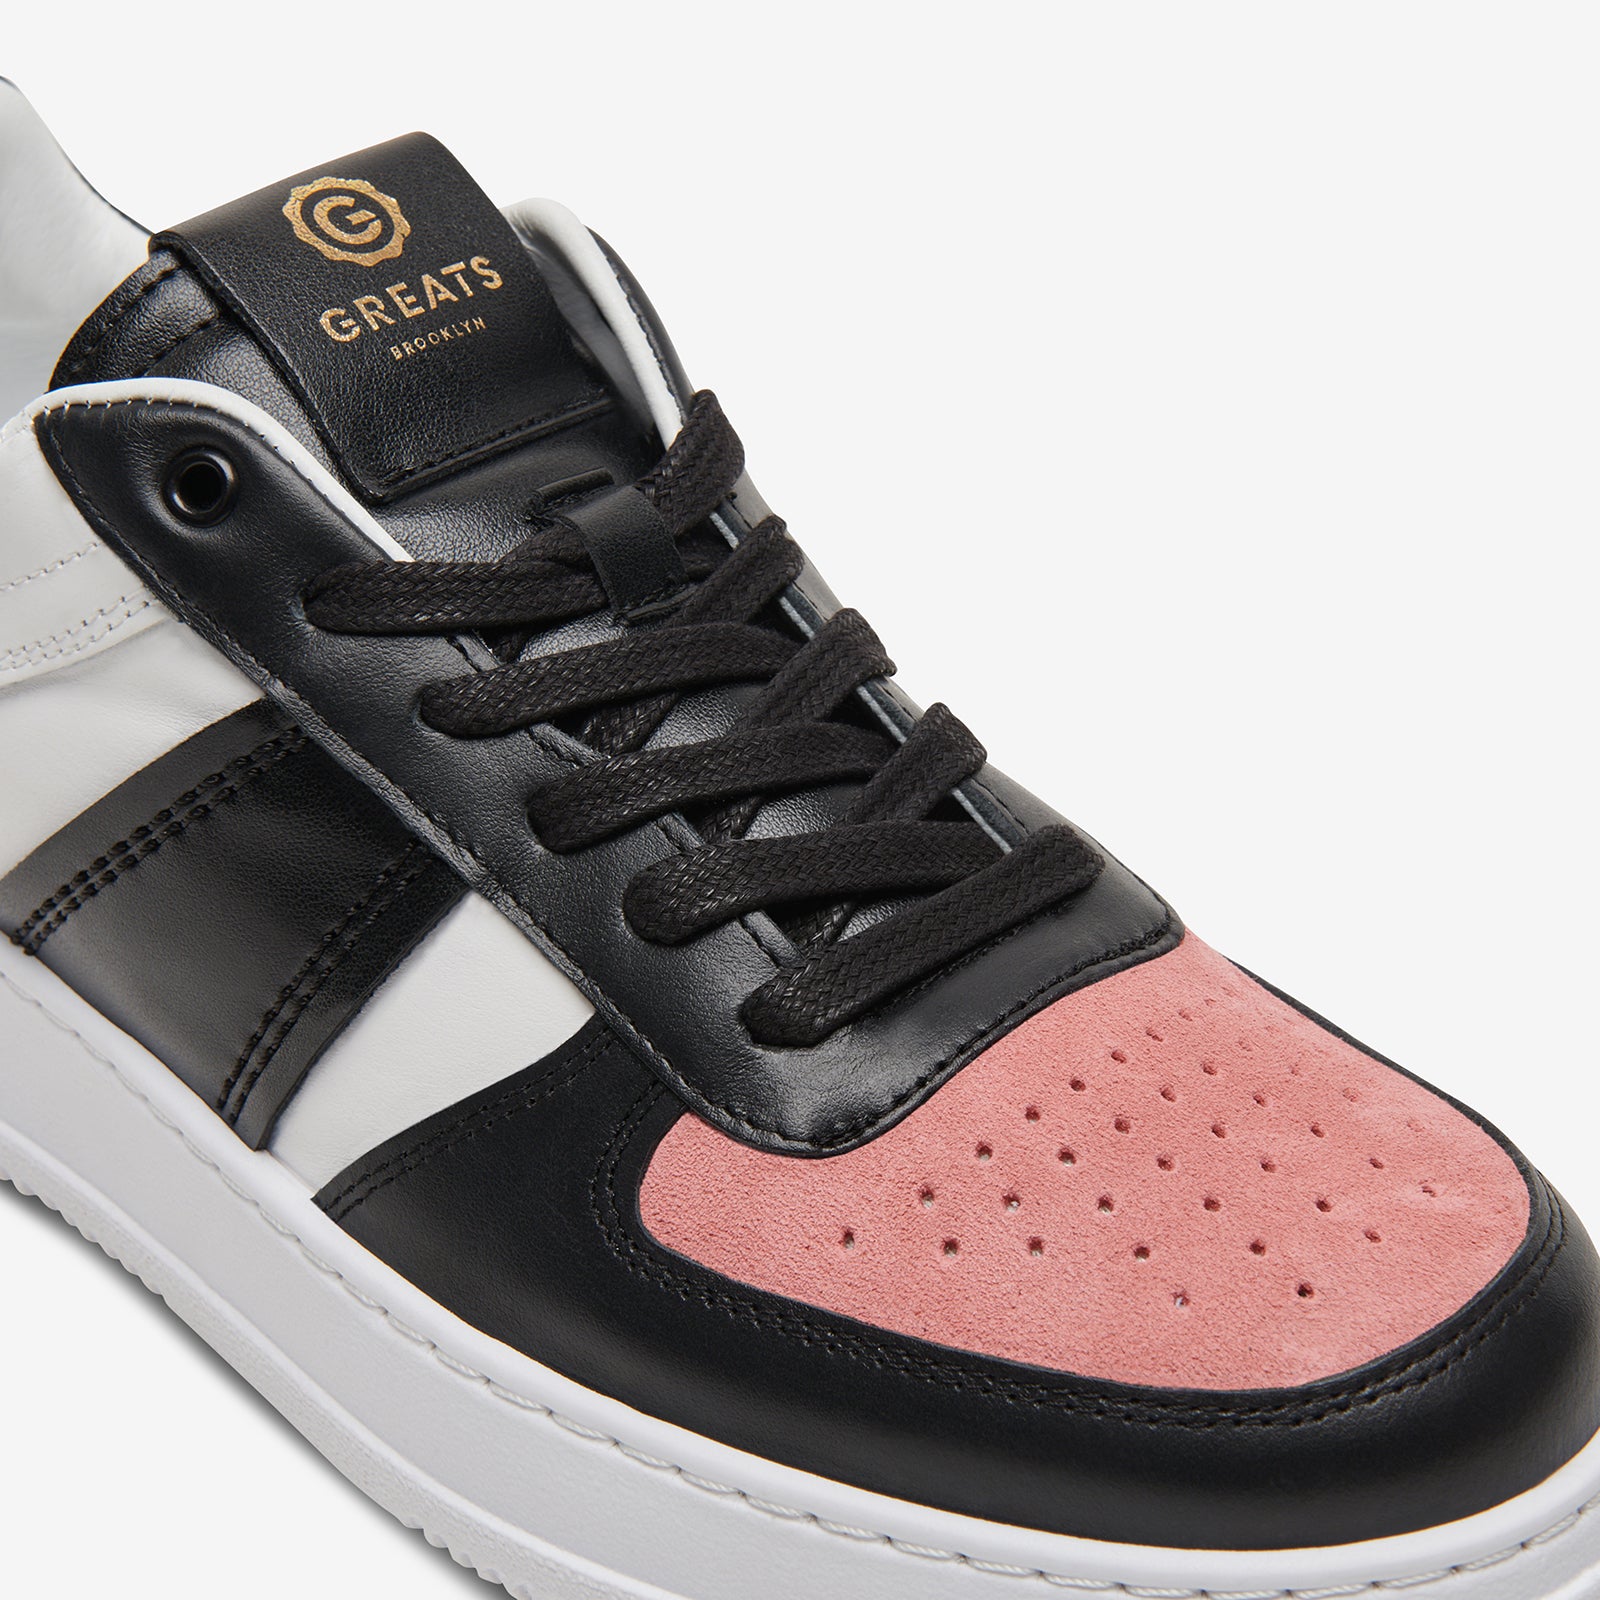 The St. James Low - Black/Pink